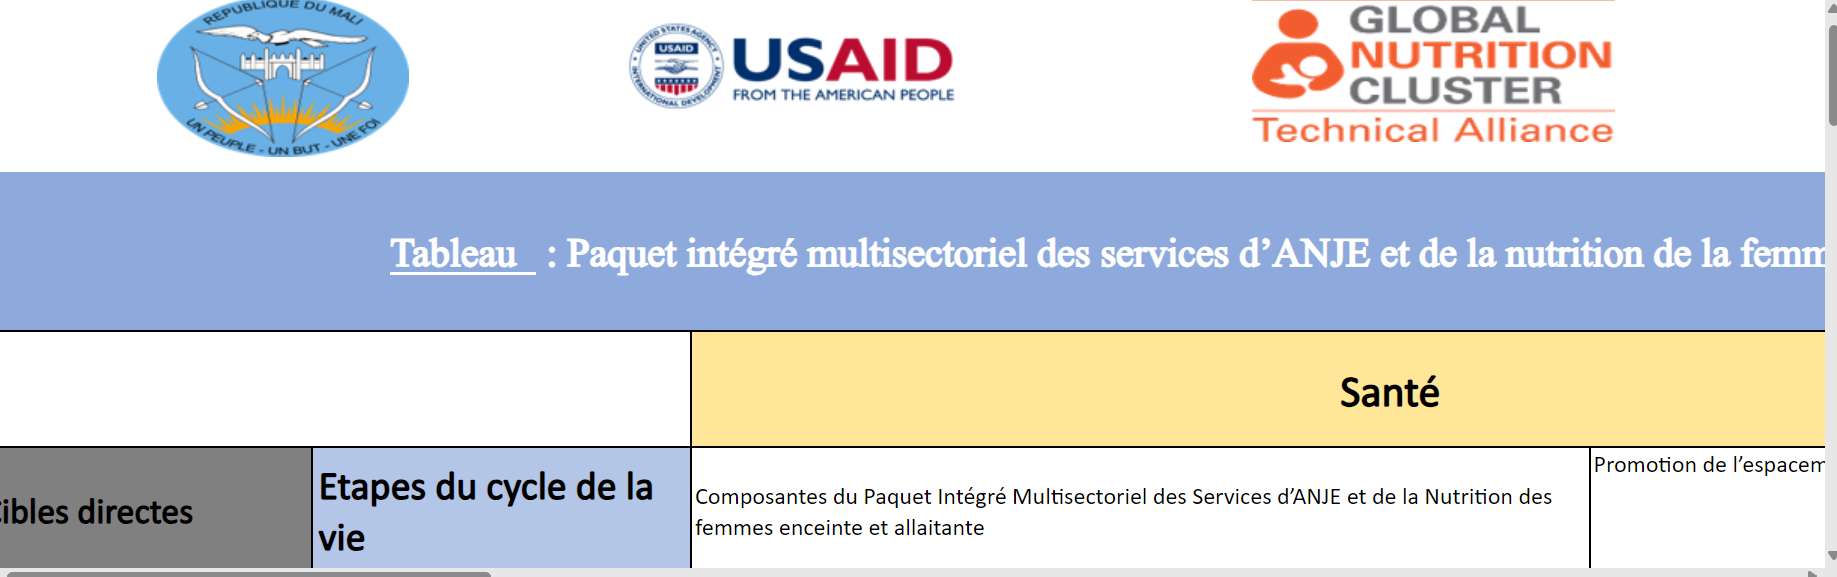 Mali IYCF-E Multisectoral Guidance and recommendations for Integration 